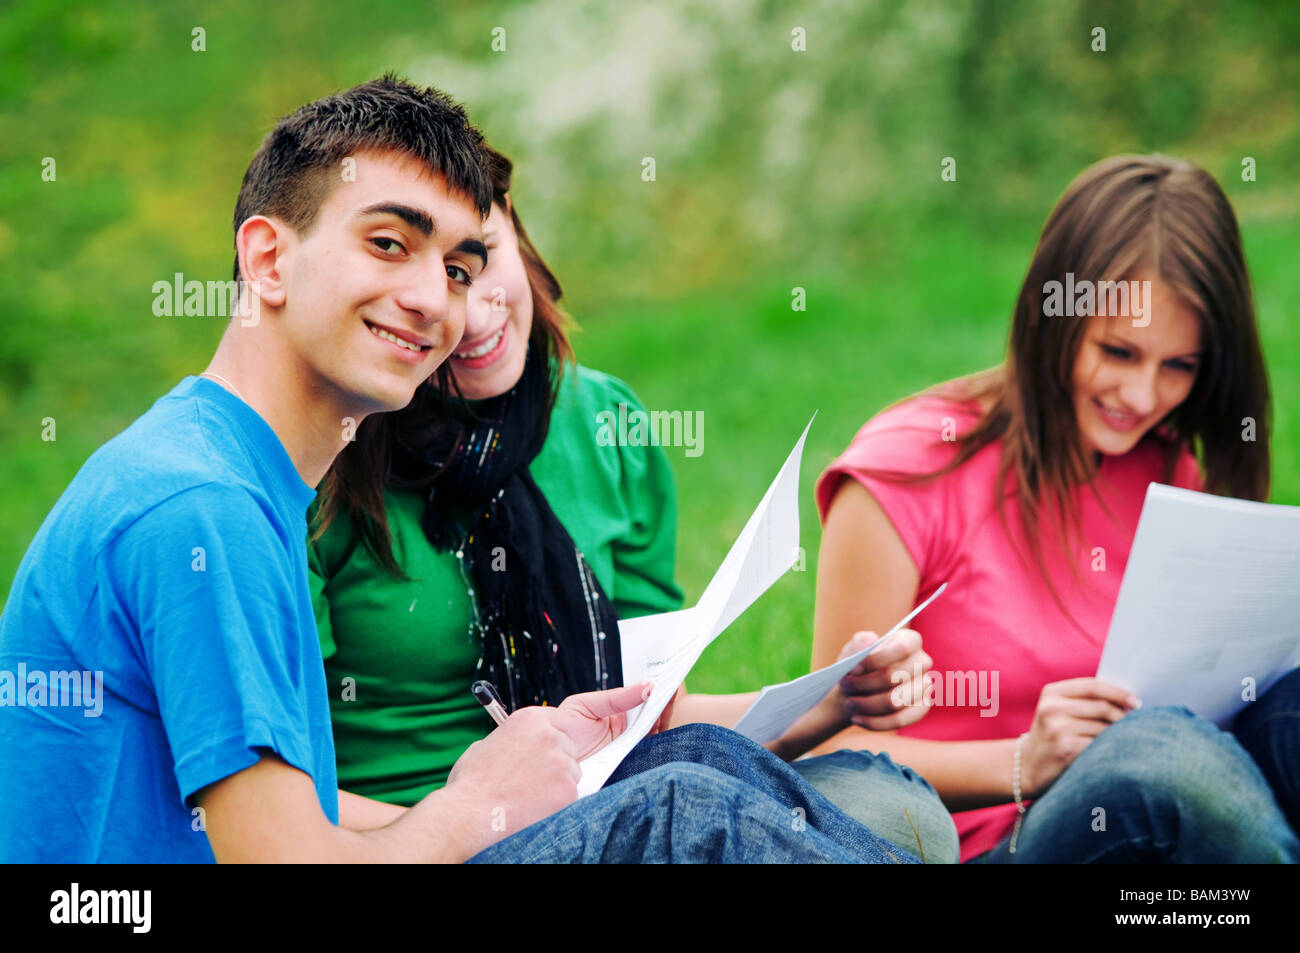 Young happy man in harmony with nature Stock Photo